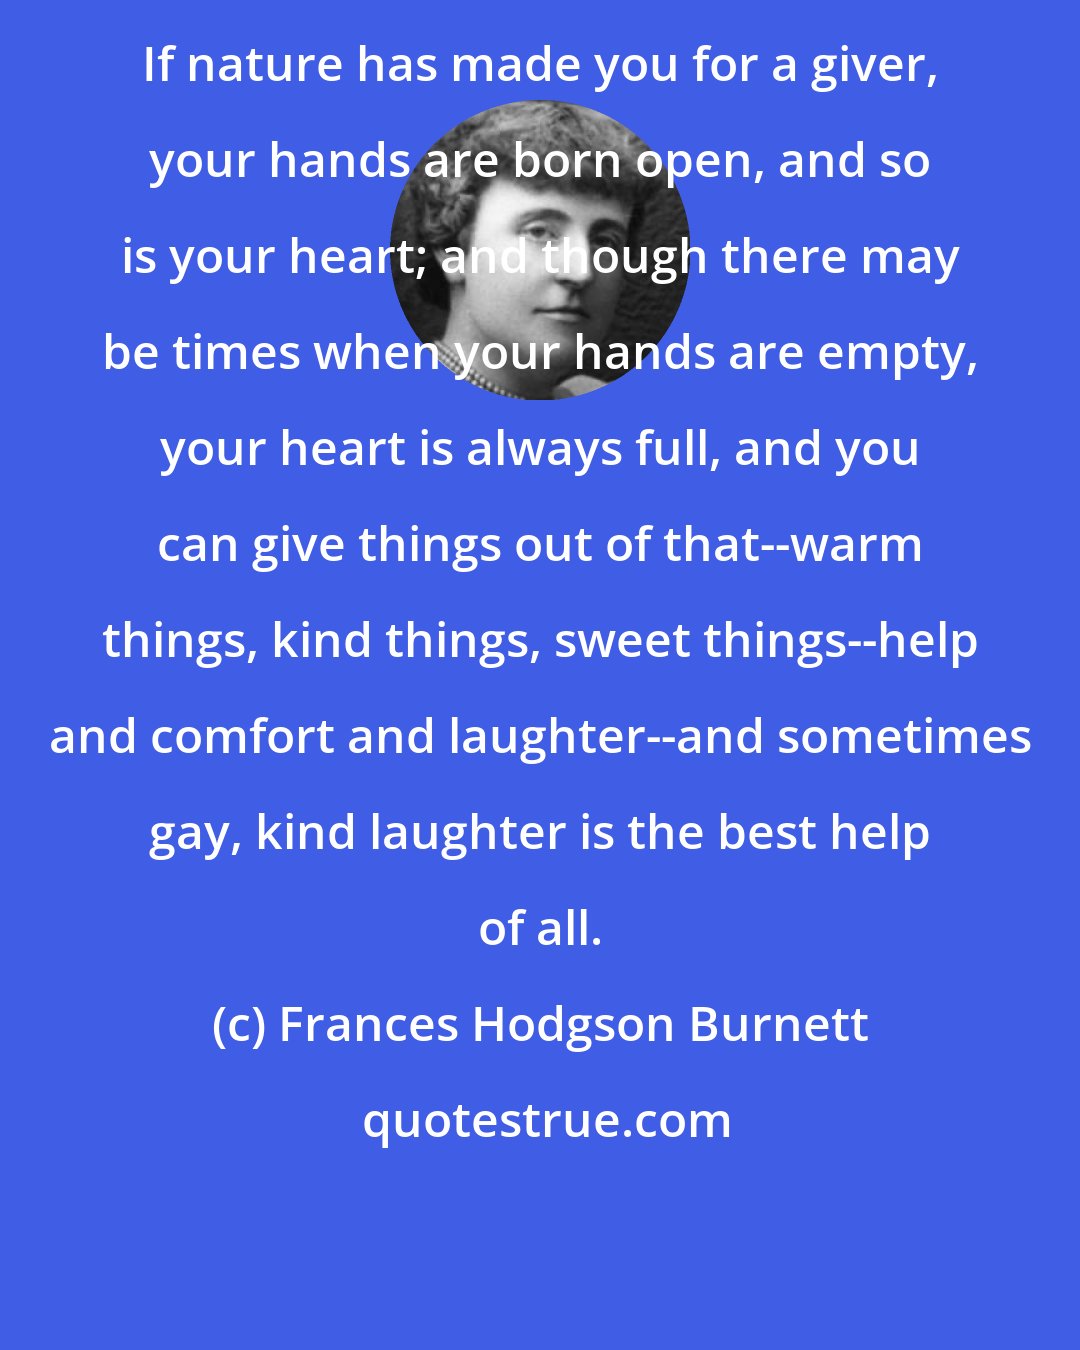 Frances Hodgson Burnett: If nature has made you for a giver, your hands are born open, and so is your heart; and though there may be times when your hands are empty, your heart is always full, and you can give things out of that--warm things, kind things, sweet things--help and comfort and laughter--and sometimes gay, kind laughter is the best help of all.